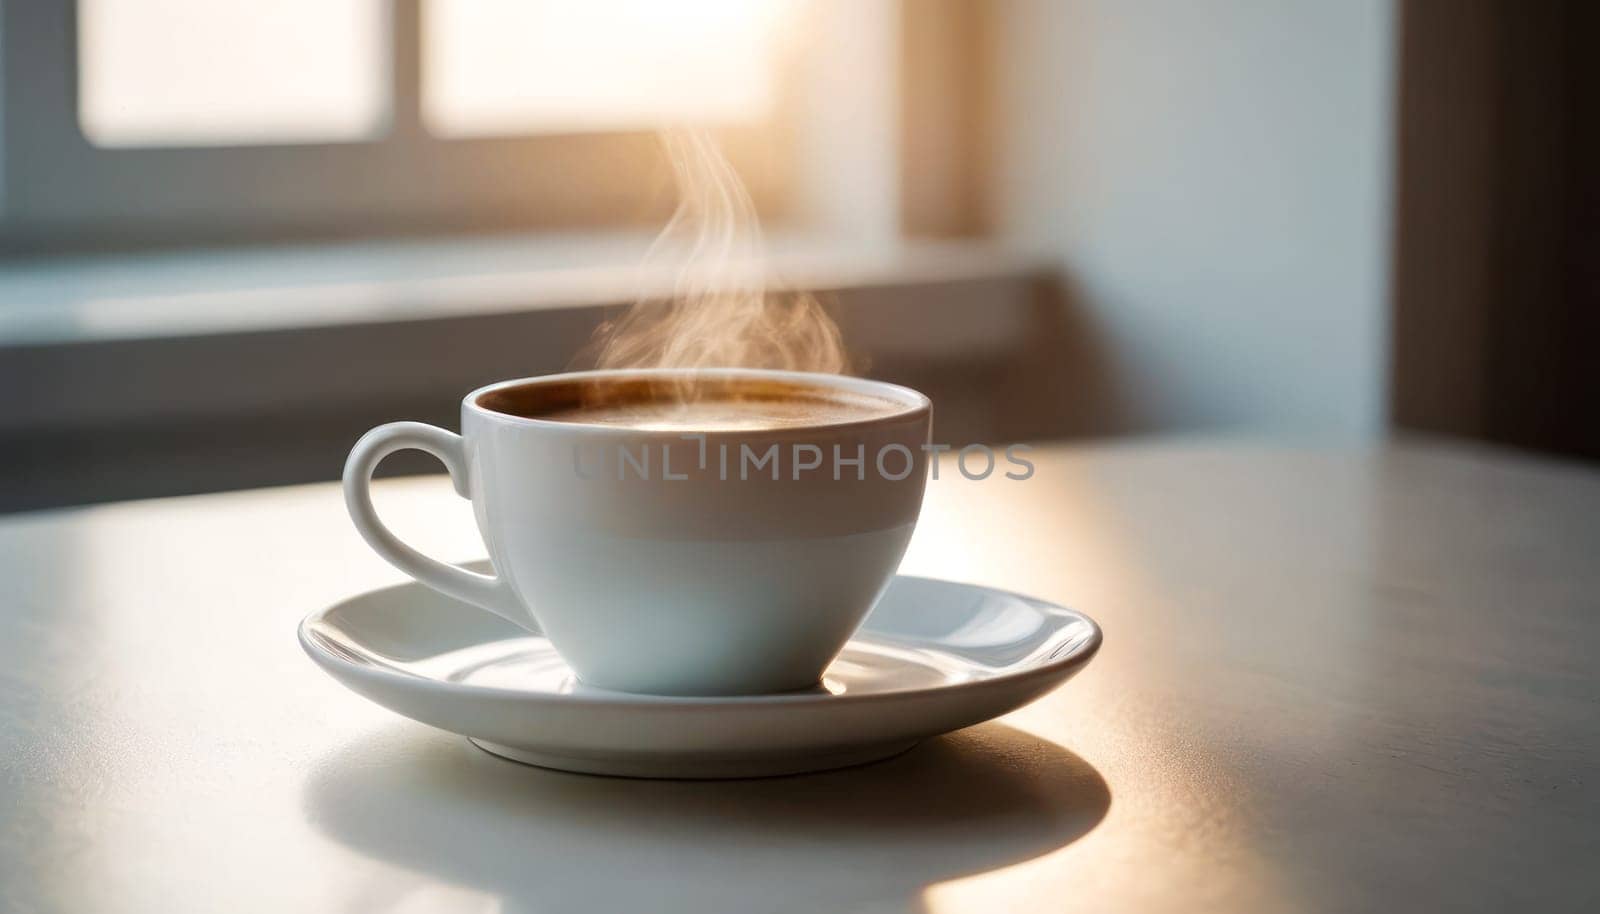 Morning Coffee: A white cup filled with steaming coffee rests on a clean white table, casting a subtle shadow. creating a serene morning scene. by Matiunina